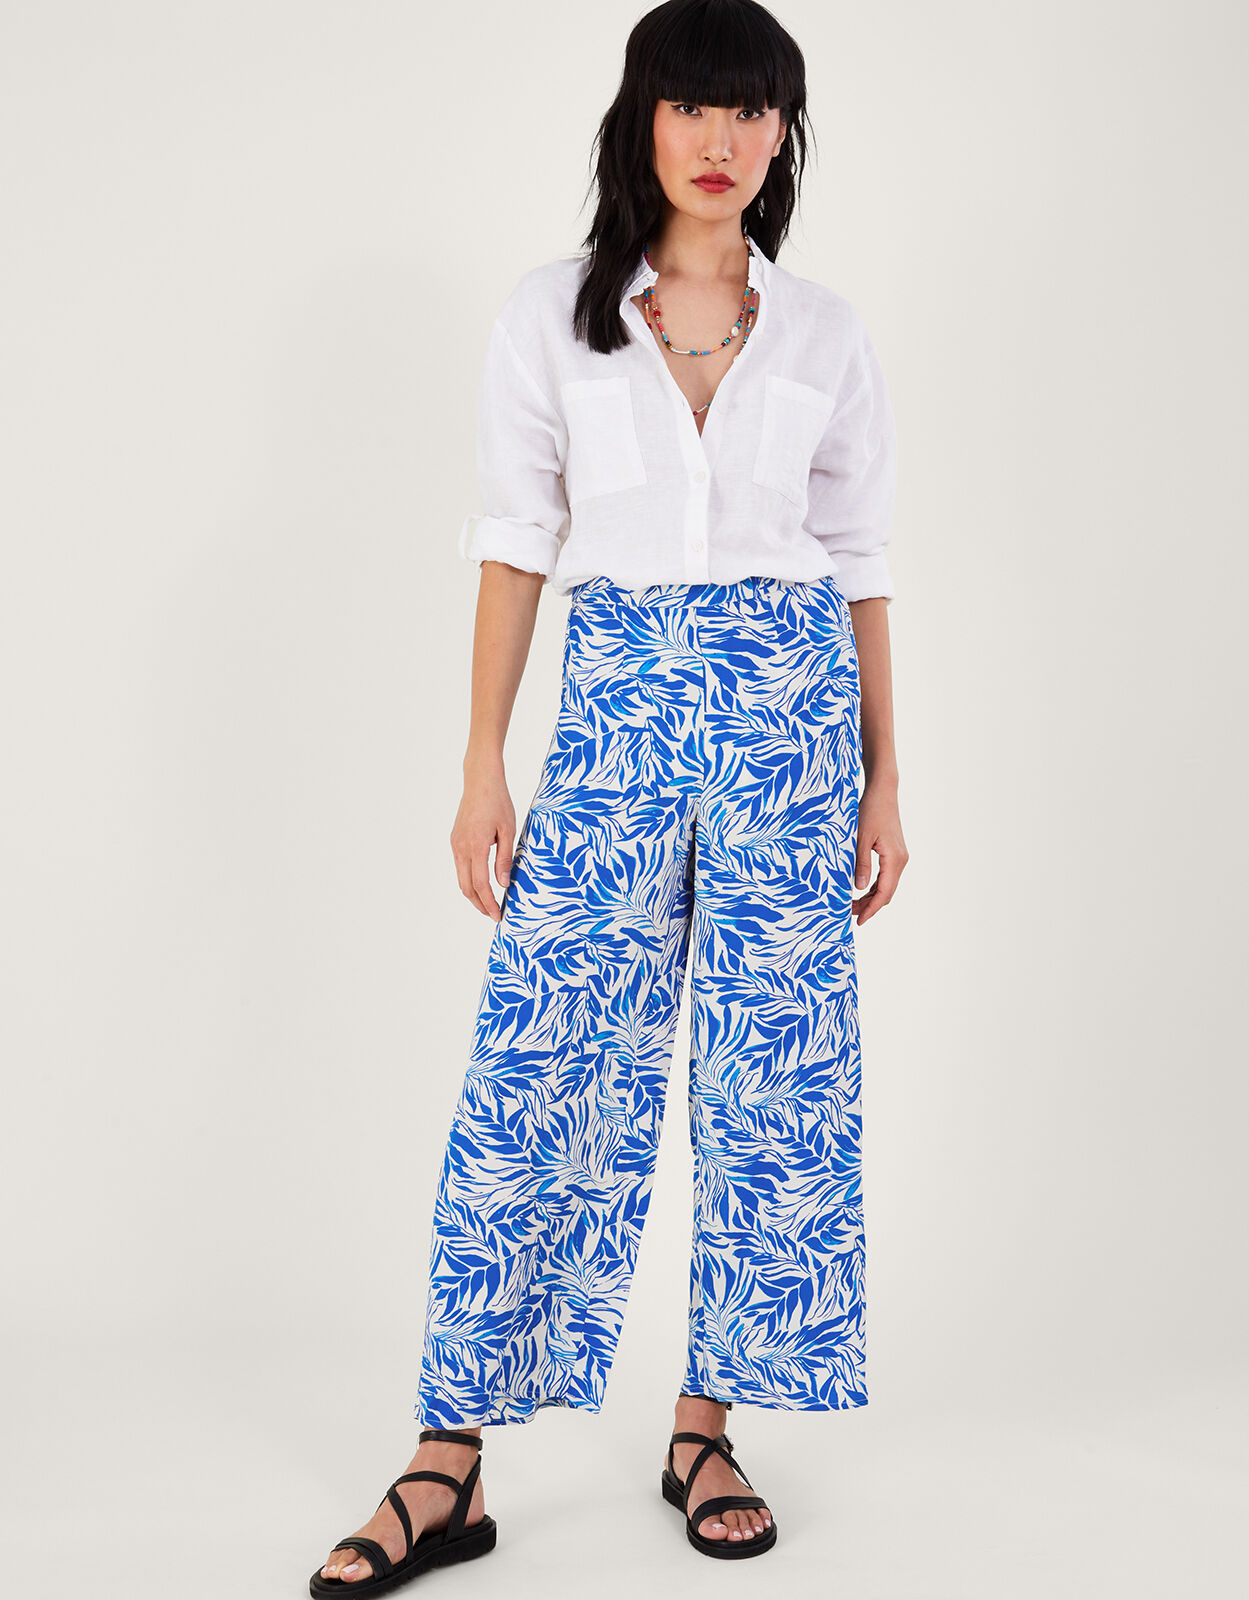 Joseph Ribkoff Floral Palazzo Trouser  Style 221320  Charles Vermont